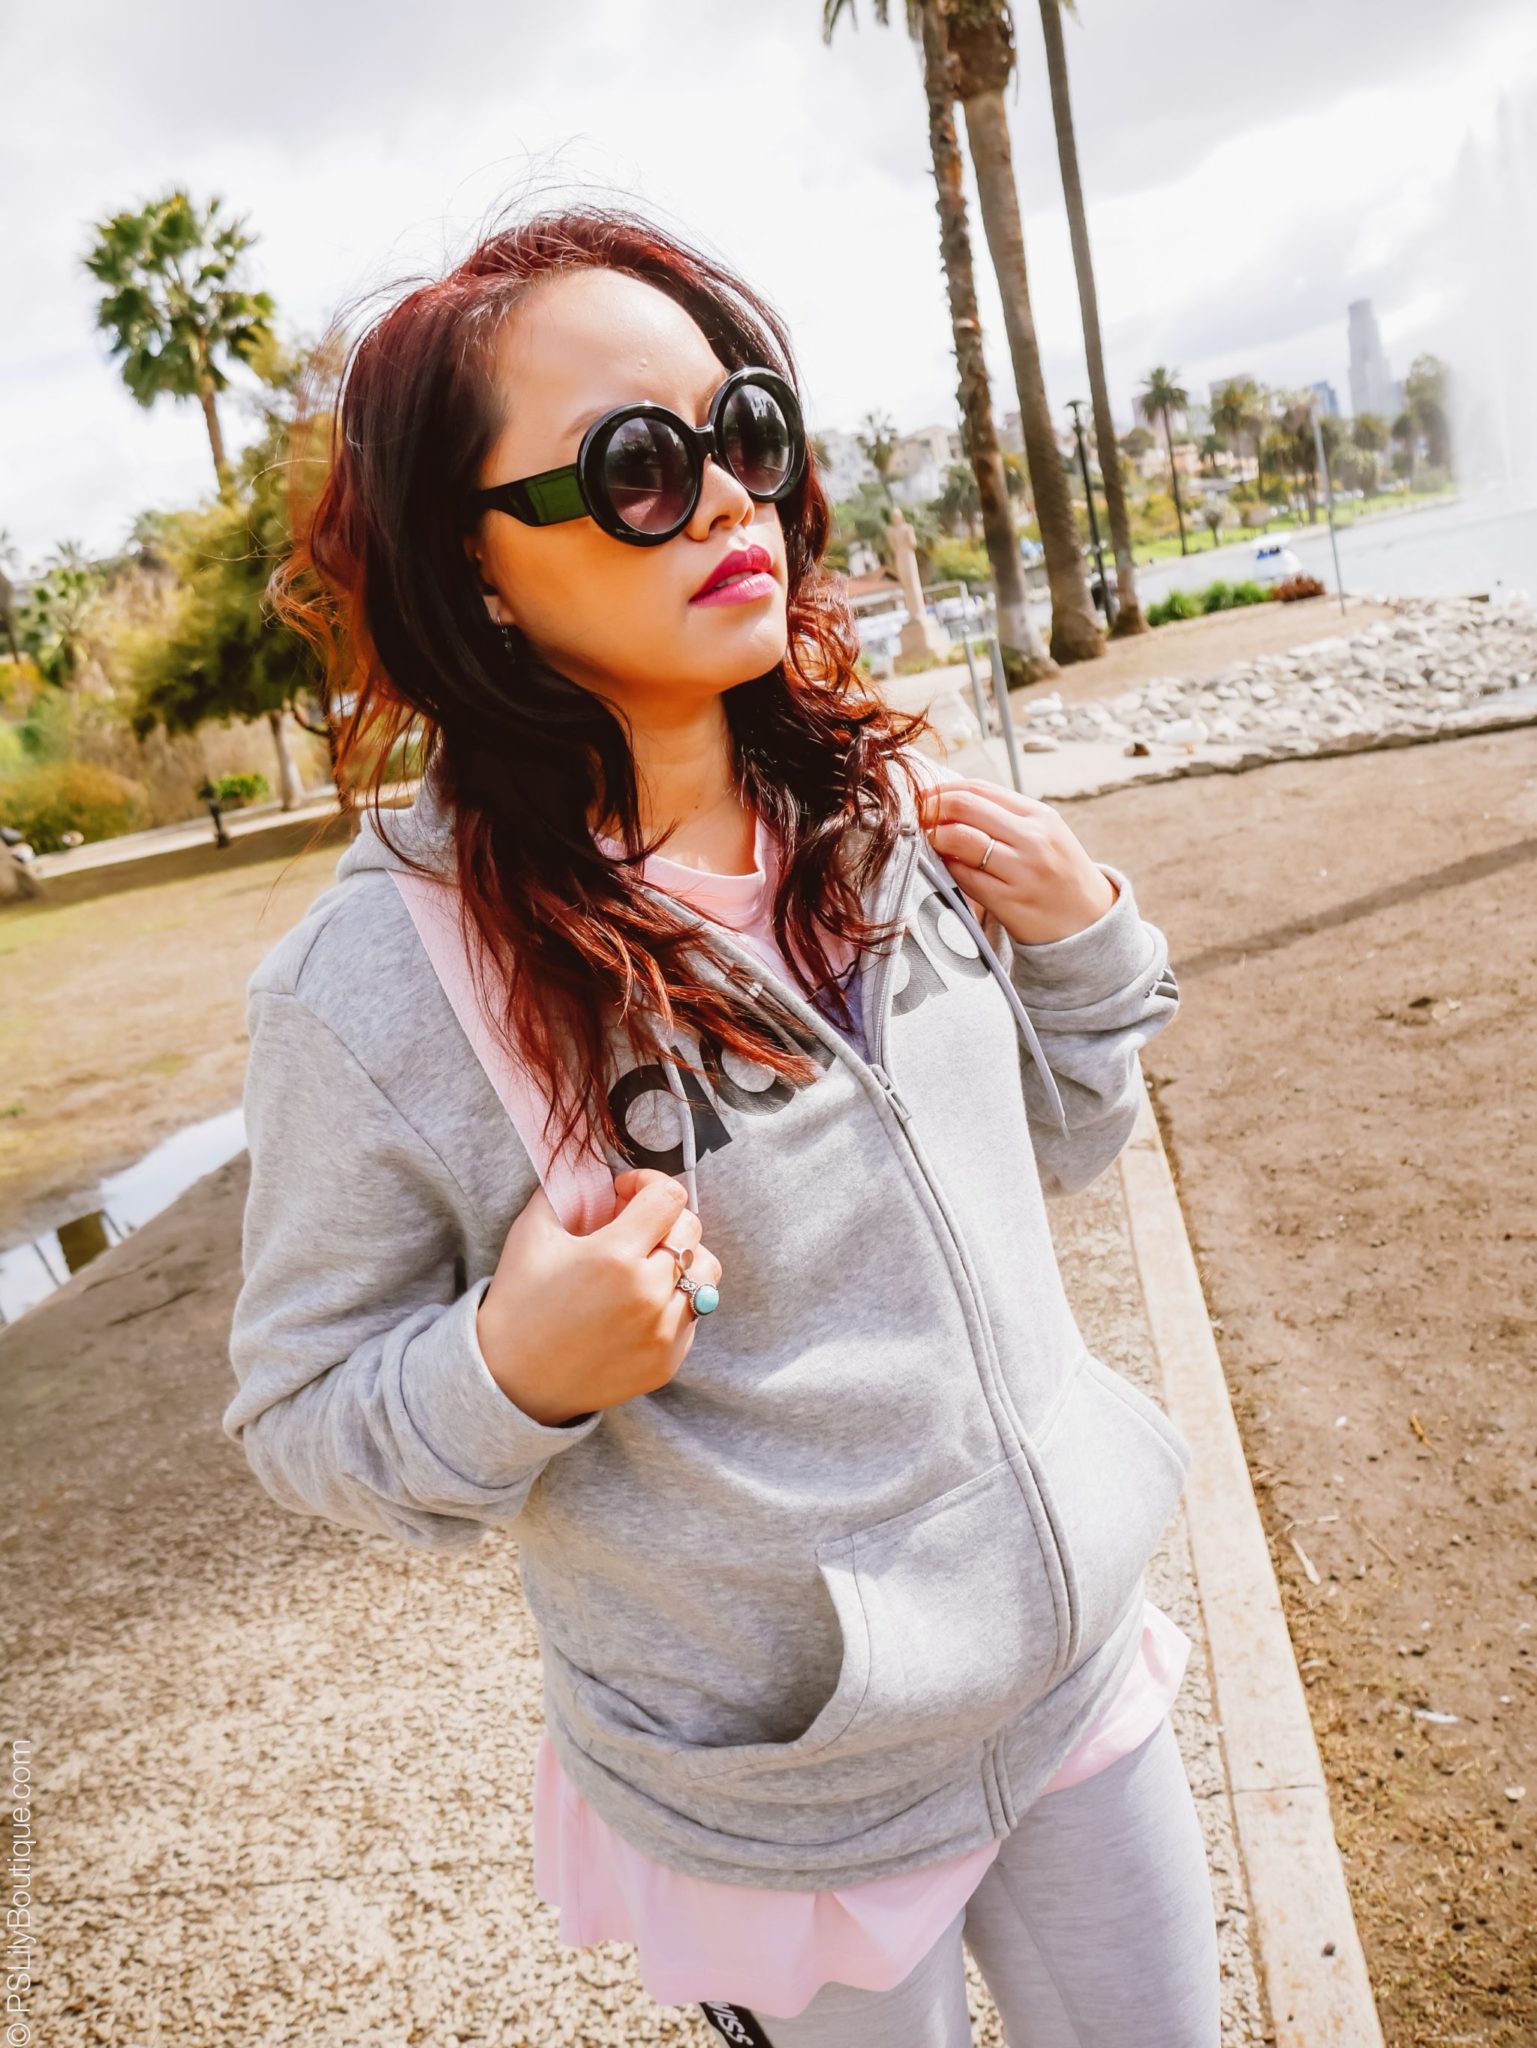 instagram-pslilyboutique-pinterest-ready-go-los-angeles-fashion-blogger-adidas-gray-hoodie-h&m-pink-printed-hawaii-t-shirt-black-round-sunglasses-cover-girl-lipstick-spring-2019-outfit-ideas-Echo_Park-4